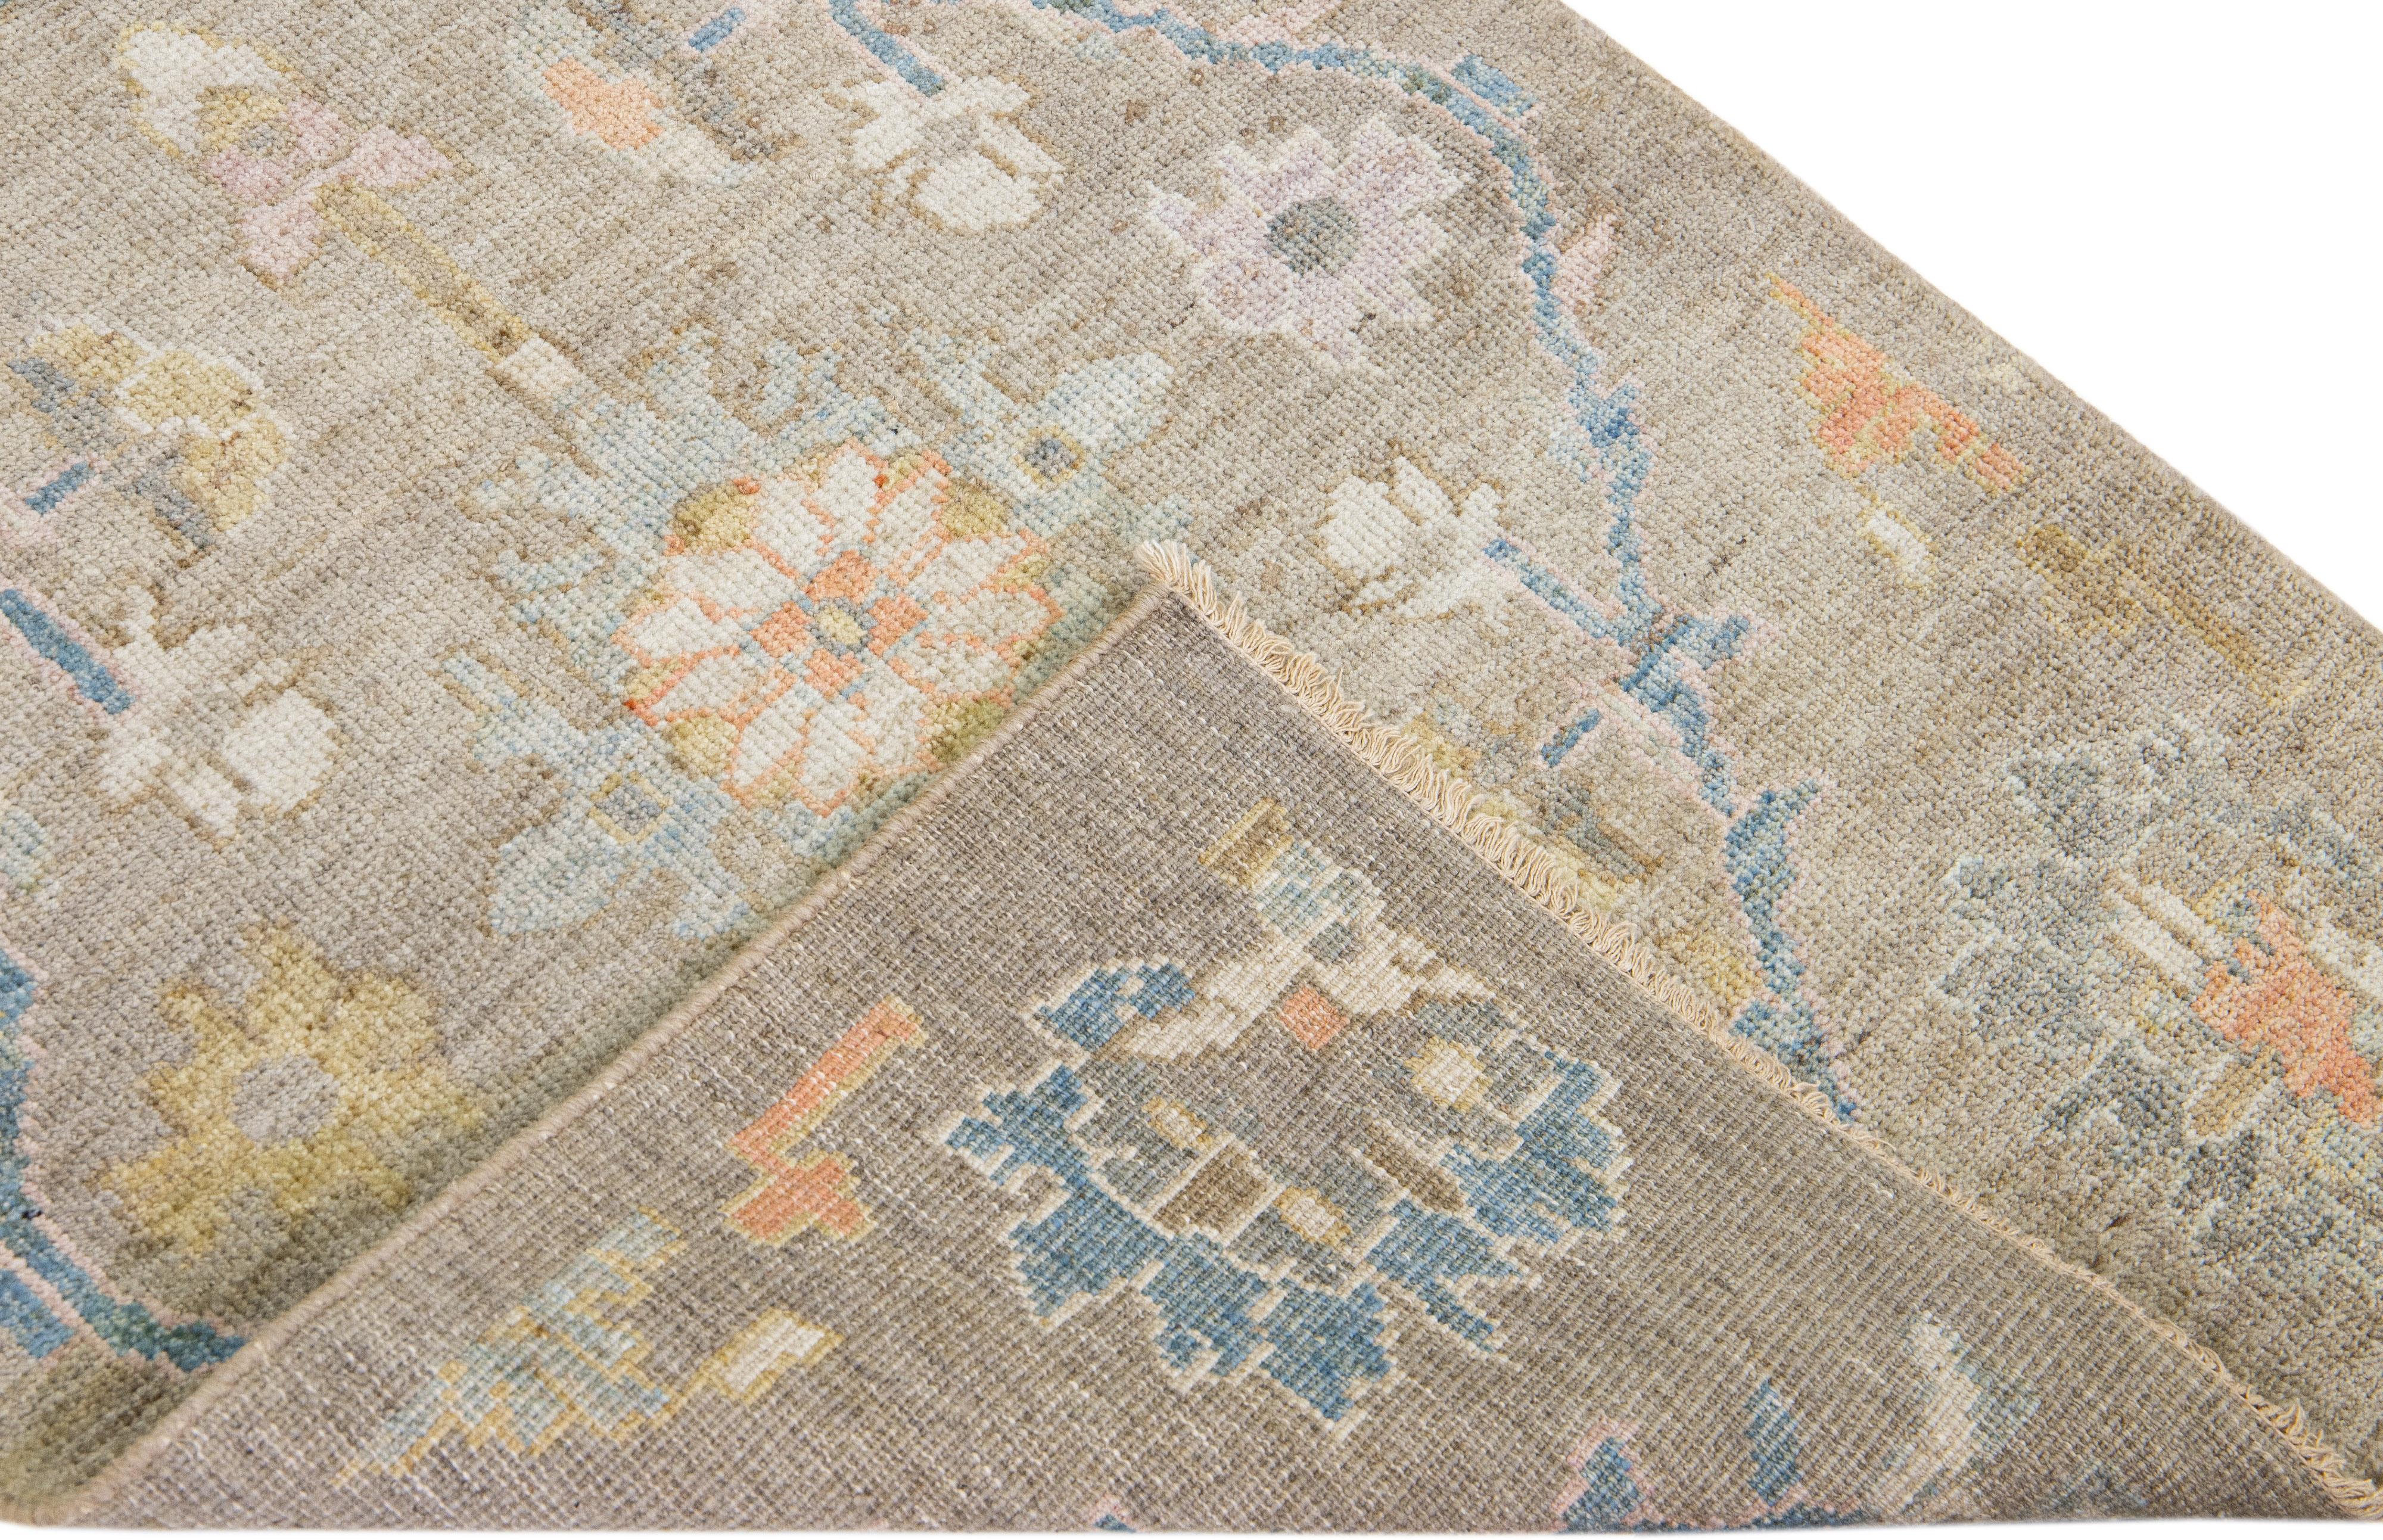 Beautiful modern Mahal hand-knotted wool runner with a brown field. This Piece has multicolor accents in a gorgeous all-over Classic floral design.

This rug measures: 2'9